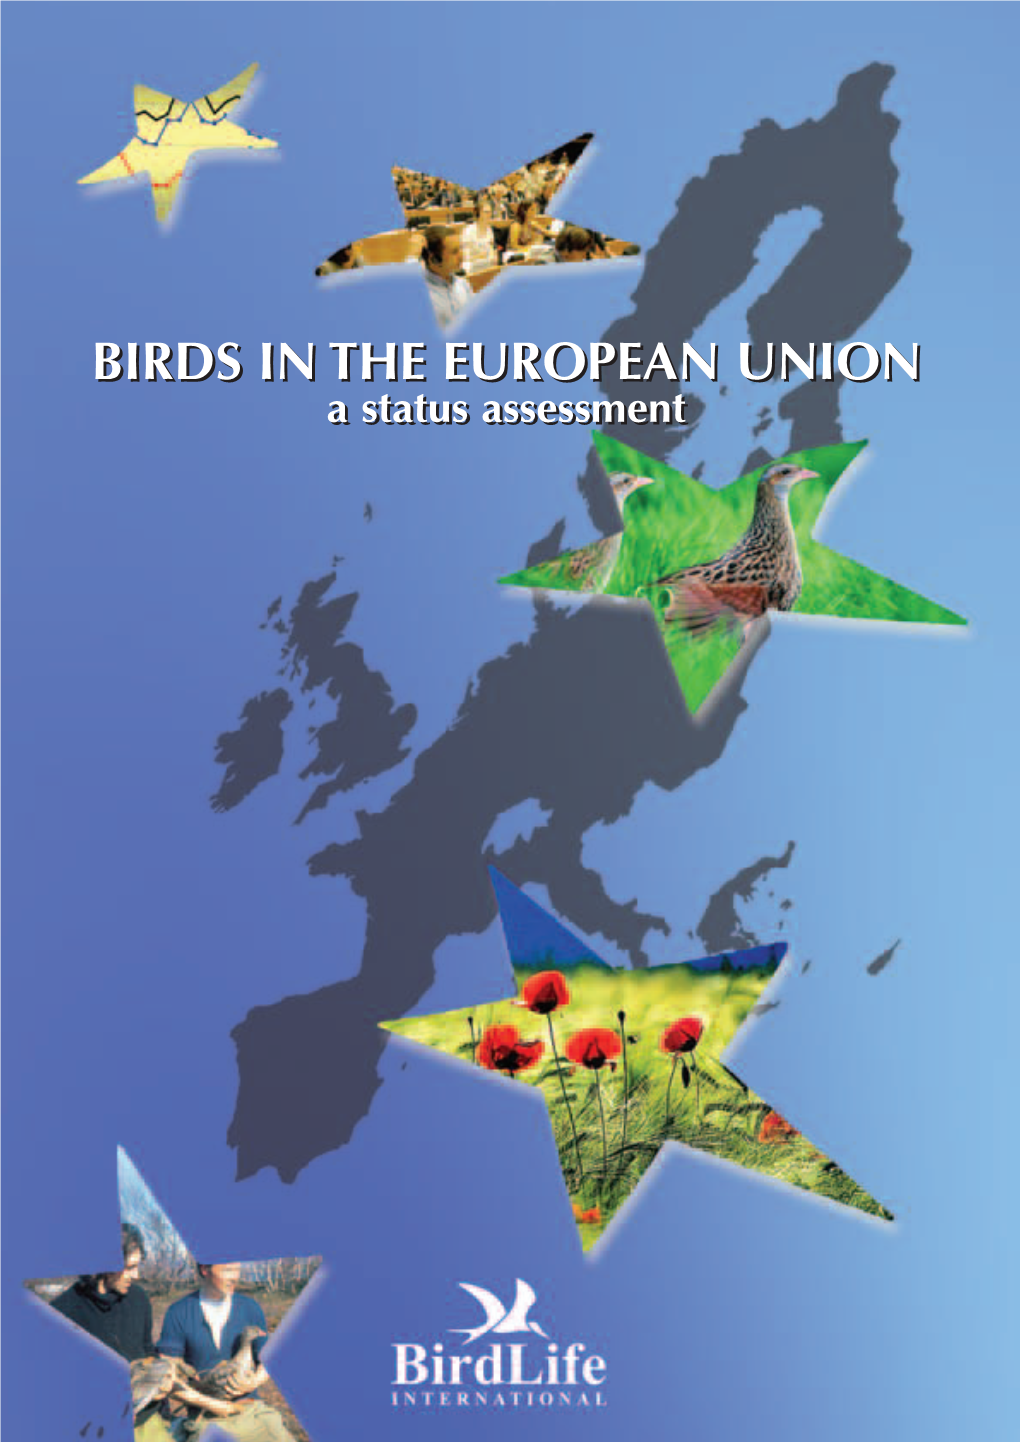 BIRDS in the EUROPEAN UNION a a BIRDS in the EUROPEAN UNION the Birdlife International Partnership Works in All Member States of the European Union and Beyond